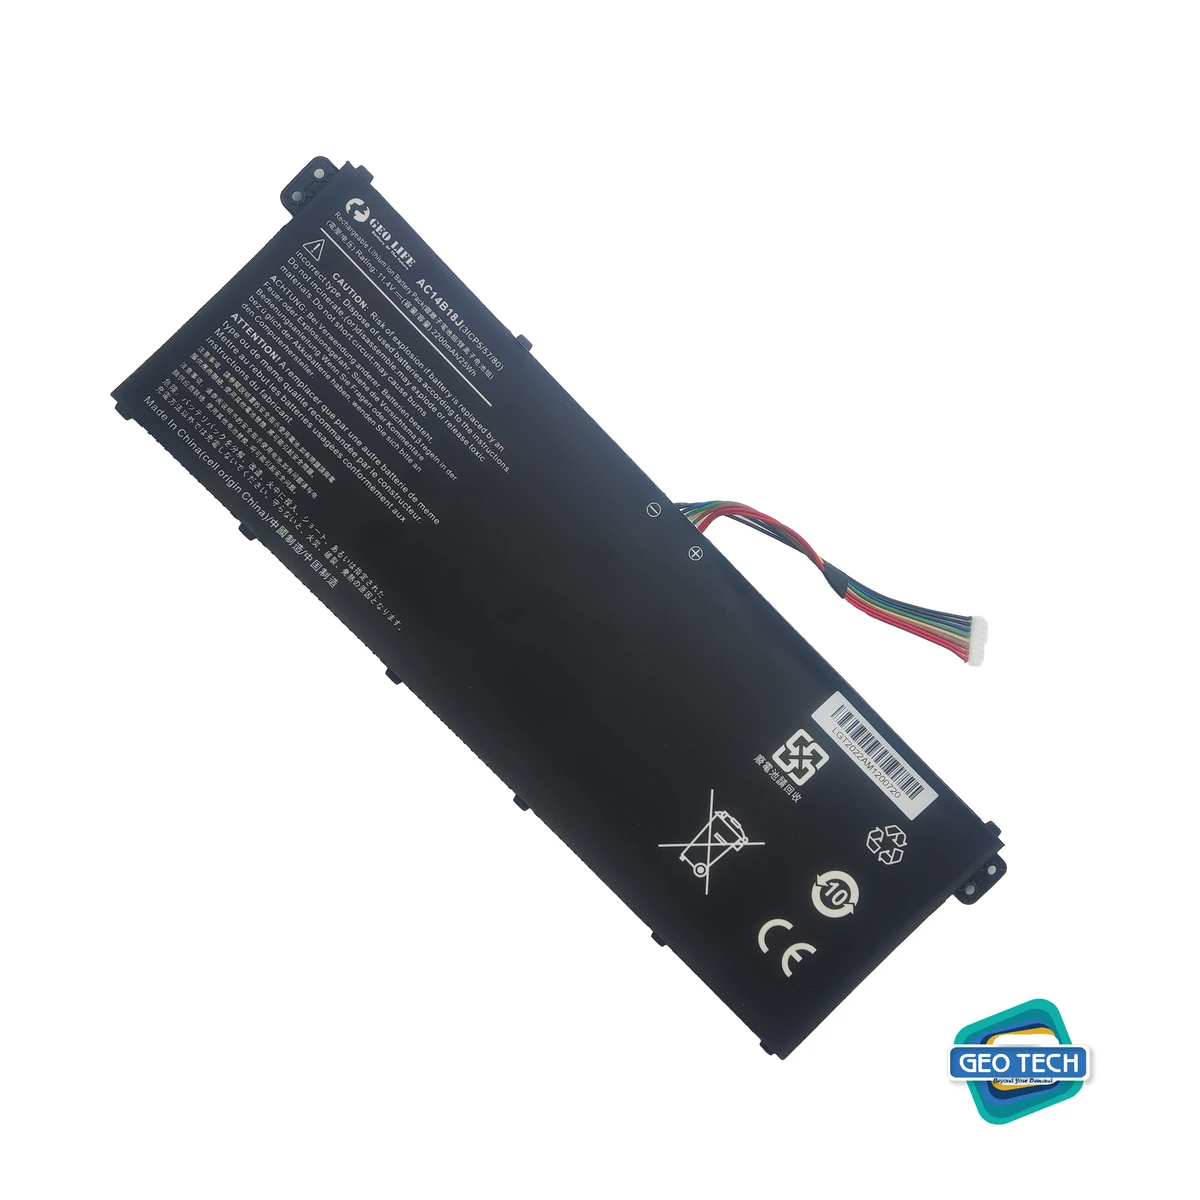 Replacement OEM Battery for Acer AC14B18J